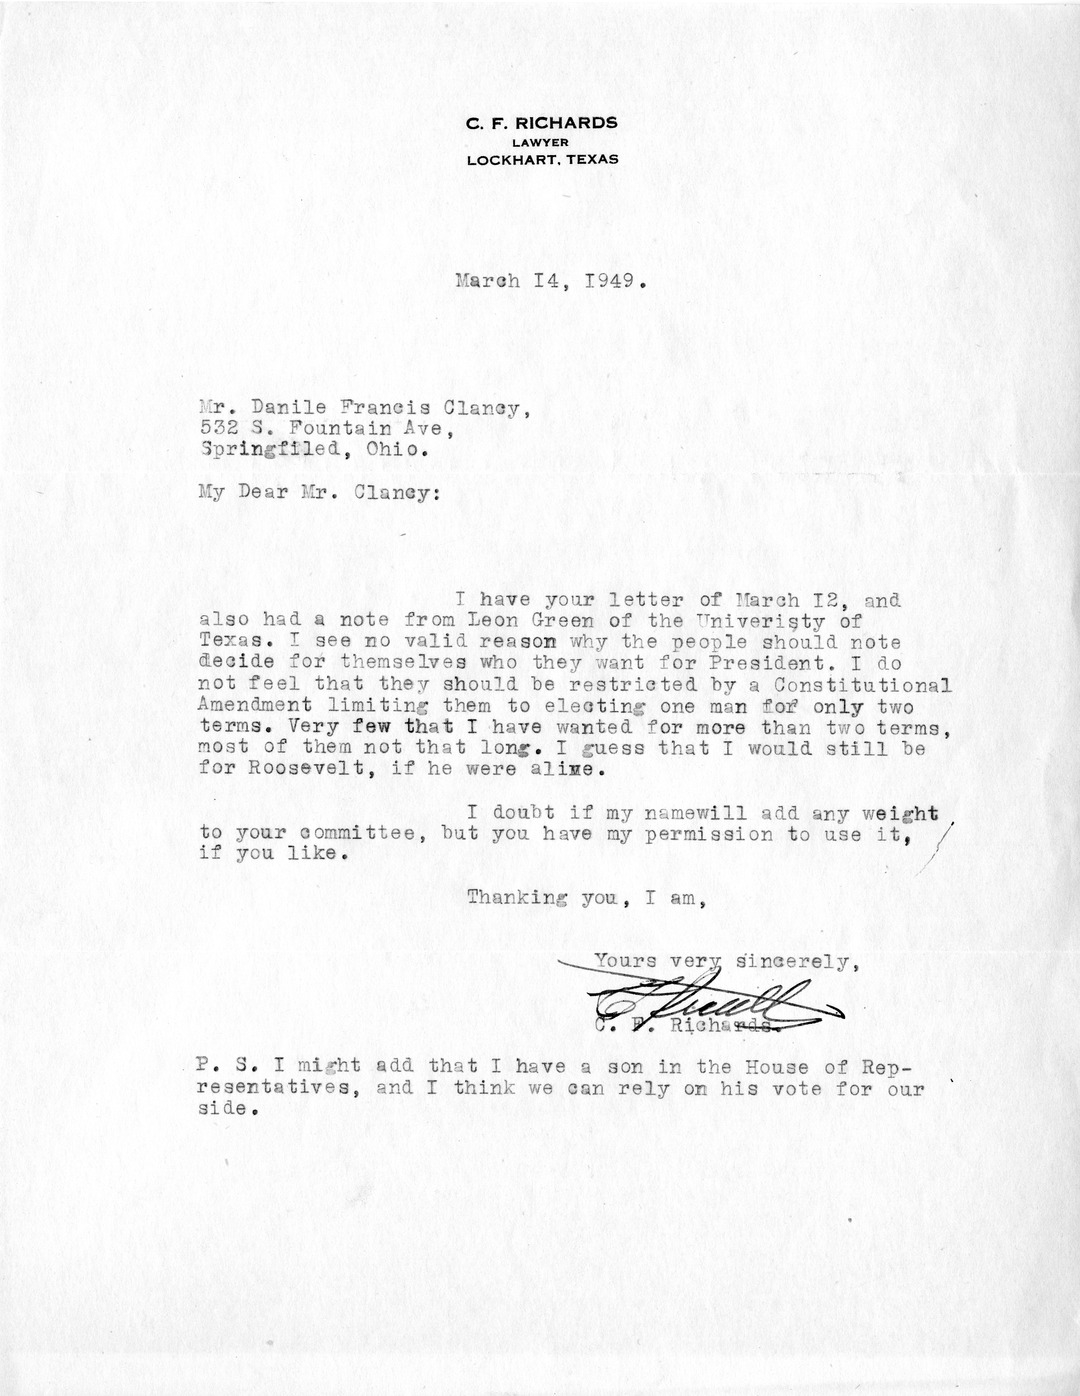 Letter from C.F. Richards to Daniel F. Clancy